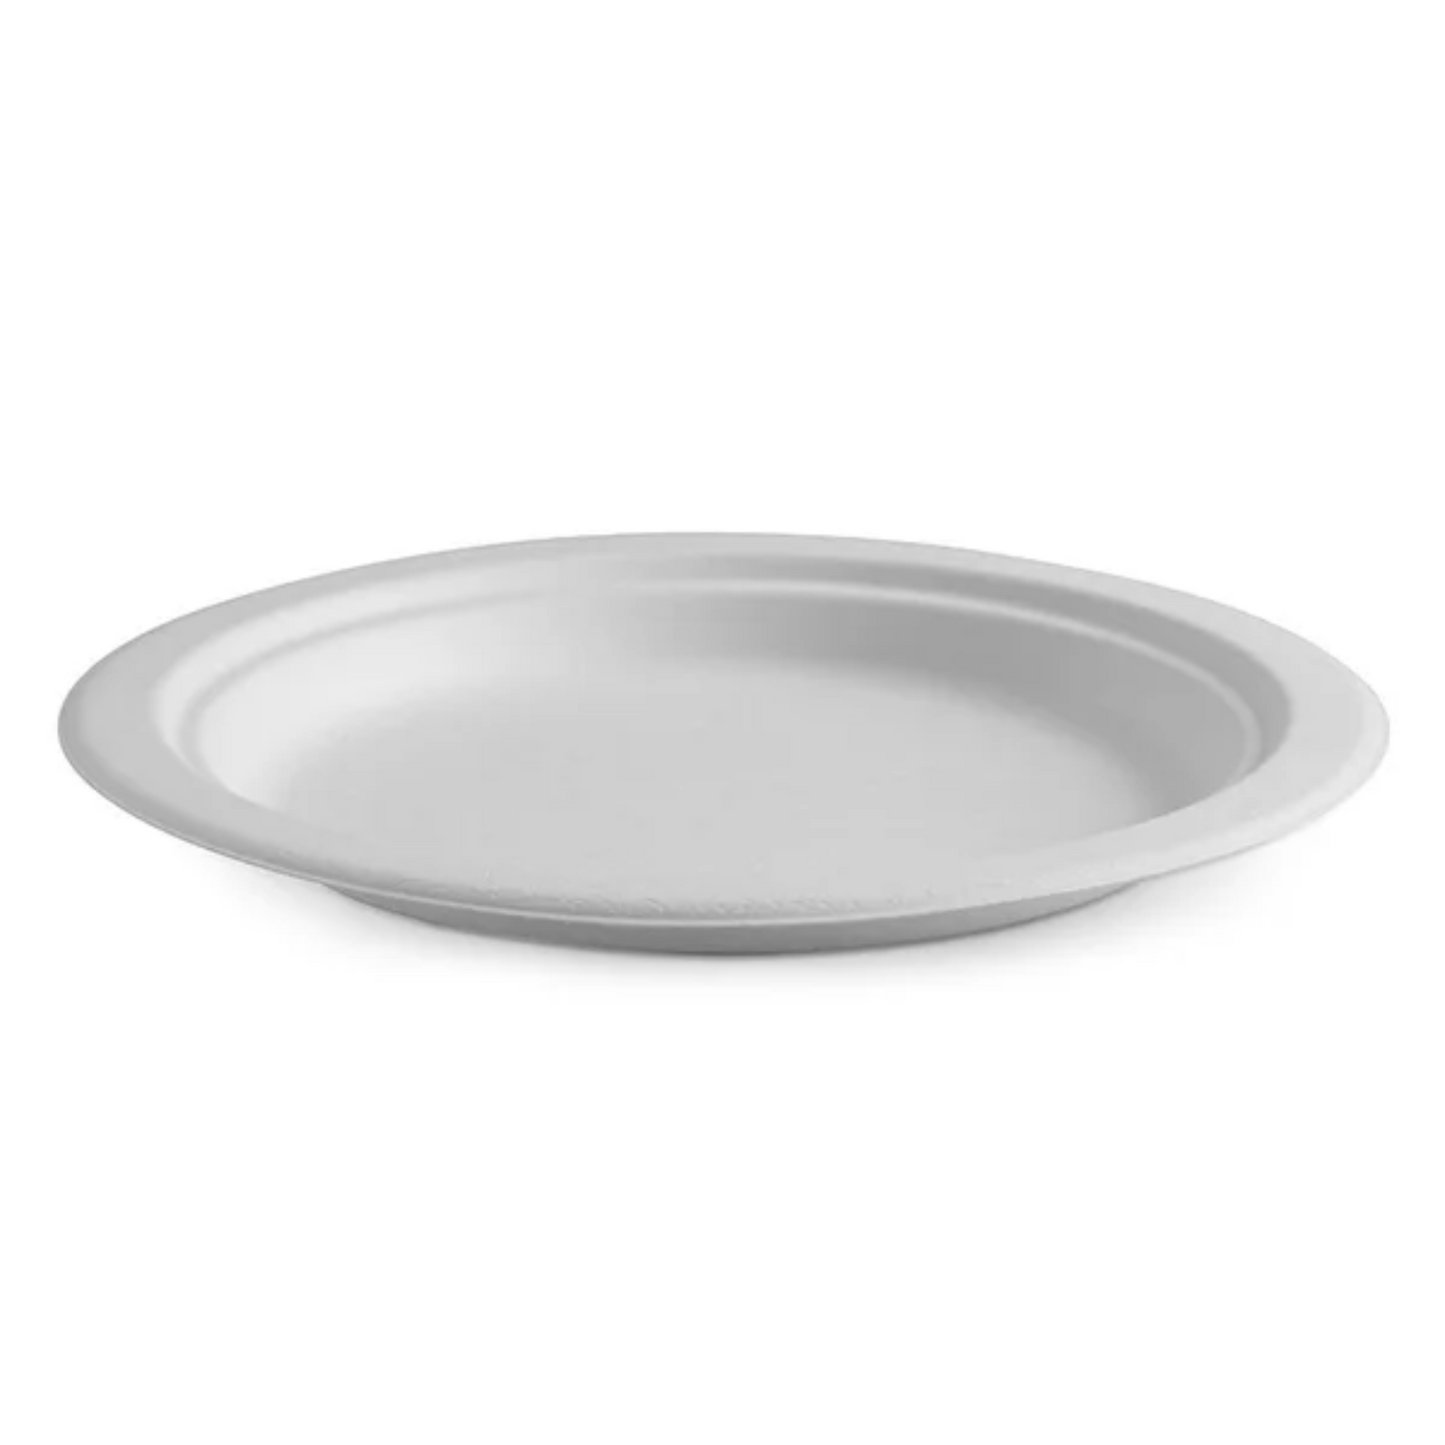 Eco-Friendly Disposable Round Plates Full Size (7/9/10 inches) Wholesale